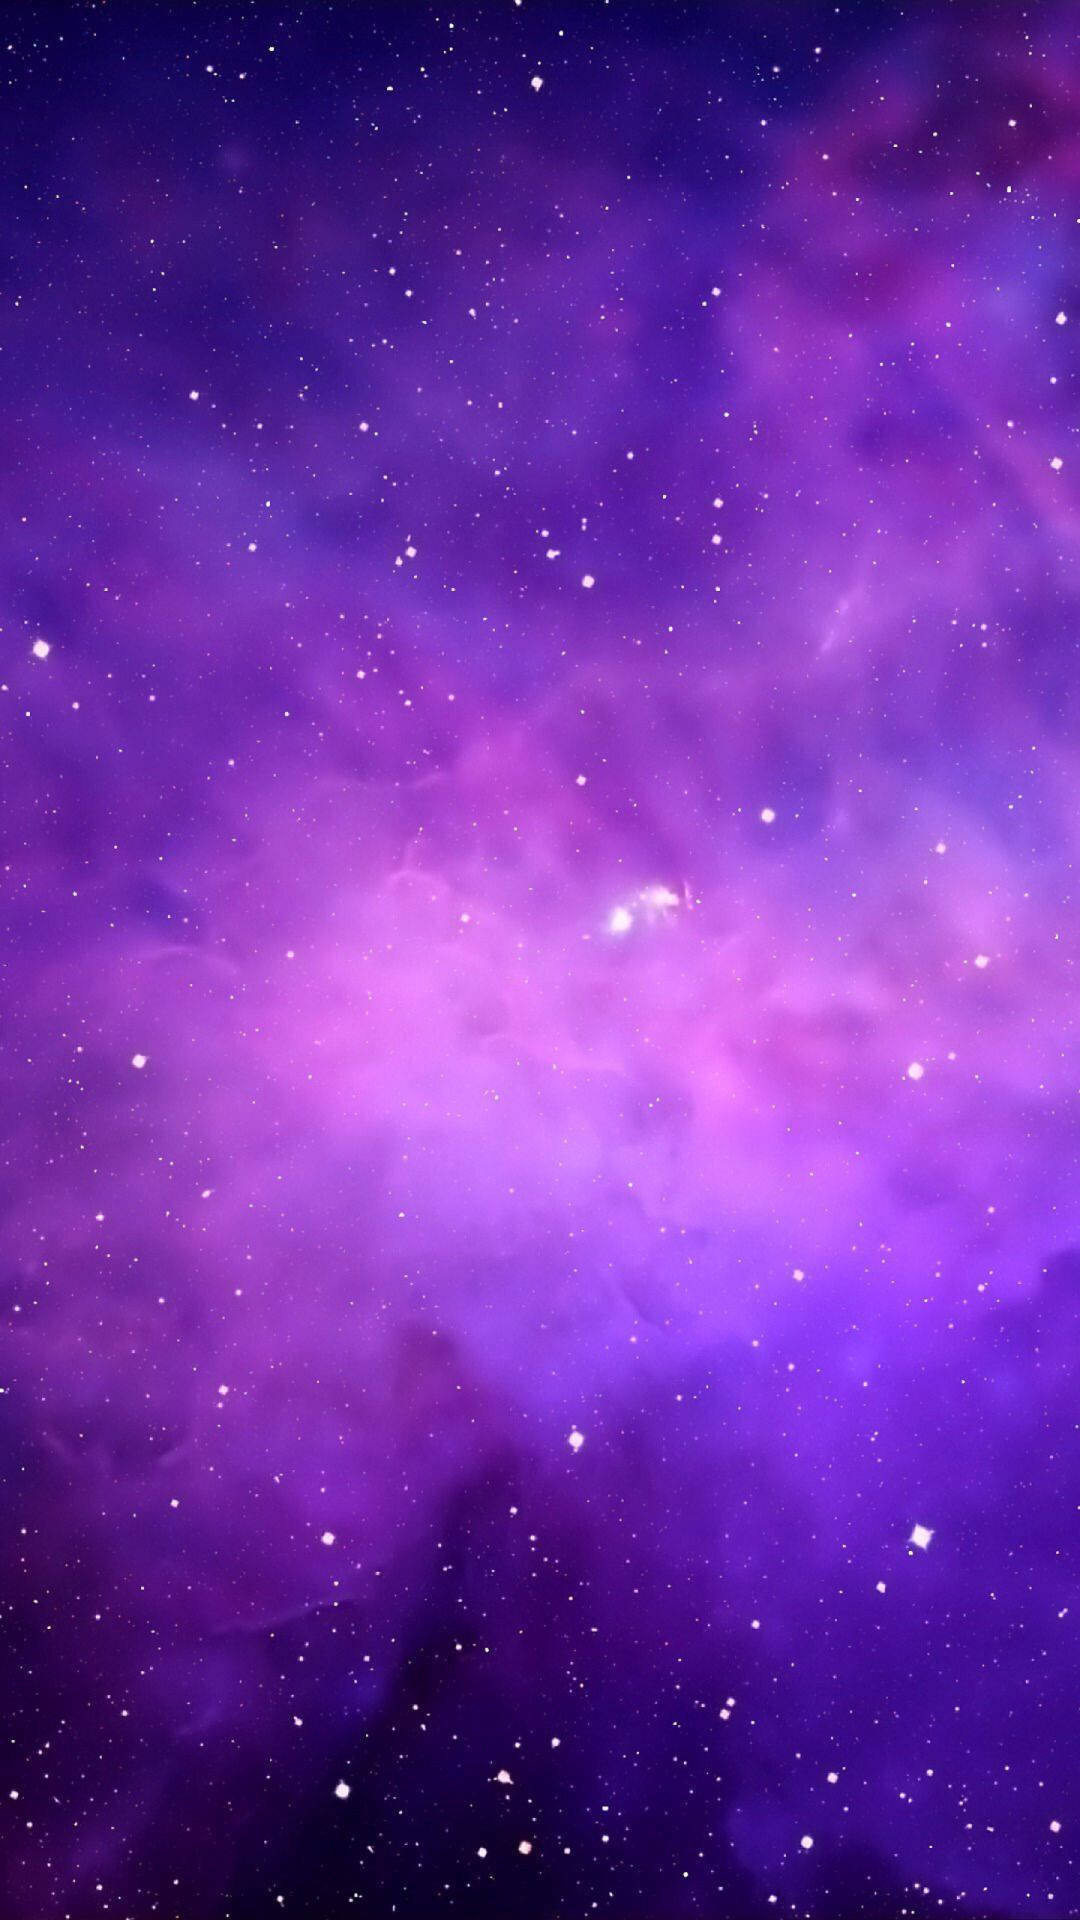 Delve Into The Bright And Majestic Purple Aesthetic Galaxy Background